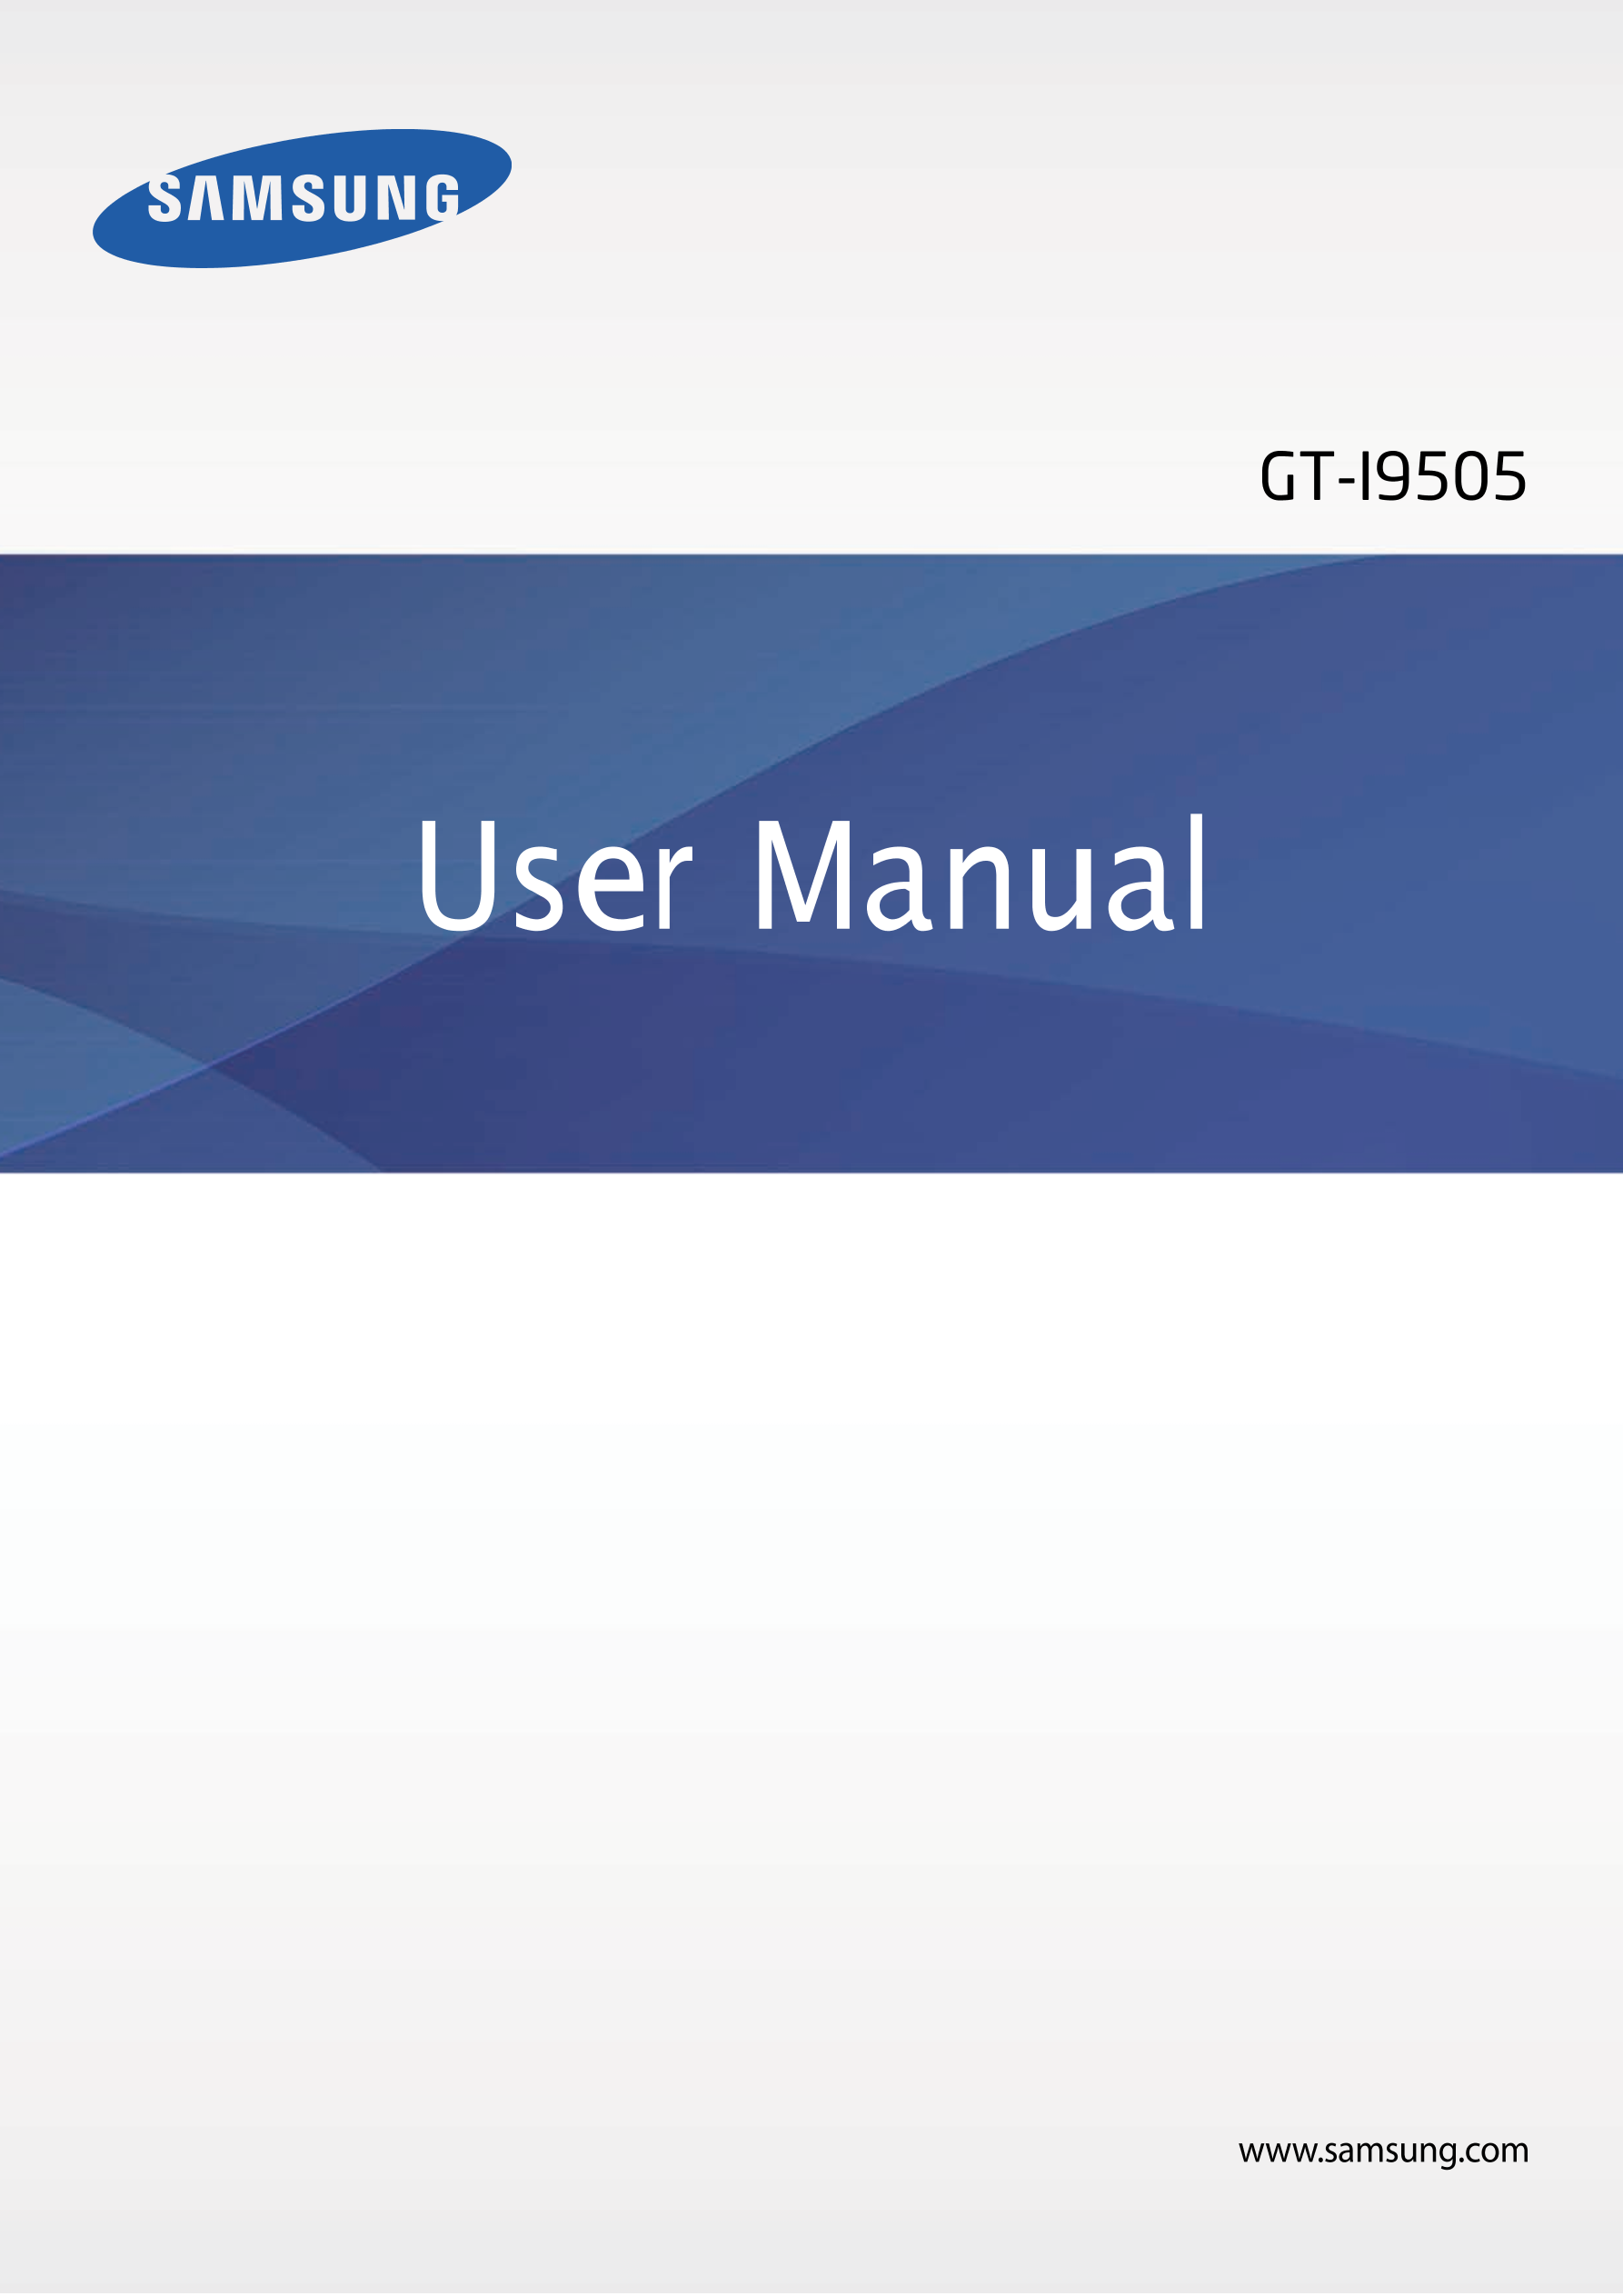 User Manual For Samsung Galaxy S4 Gt I9505